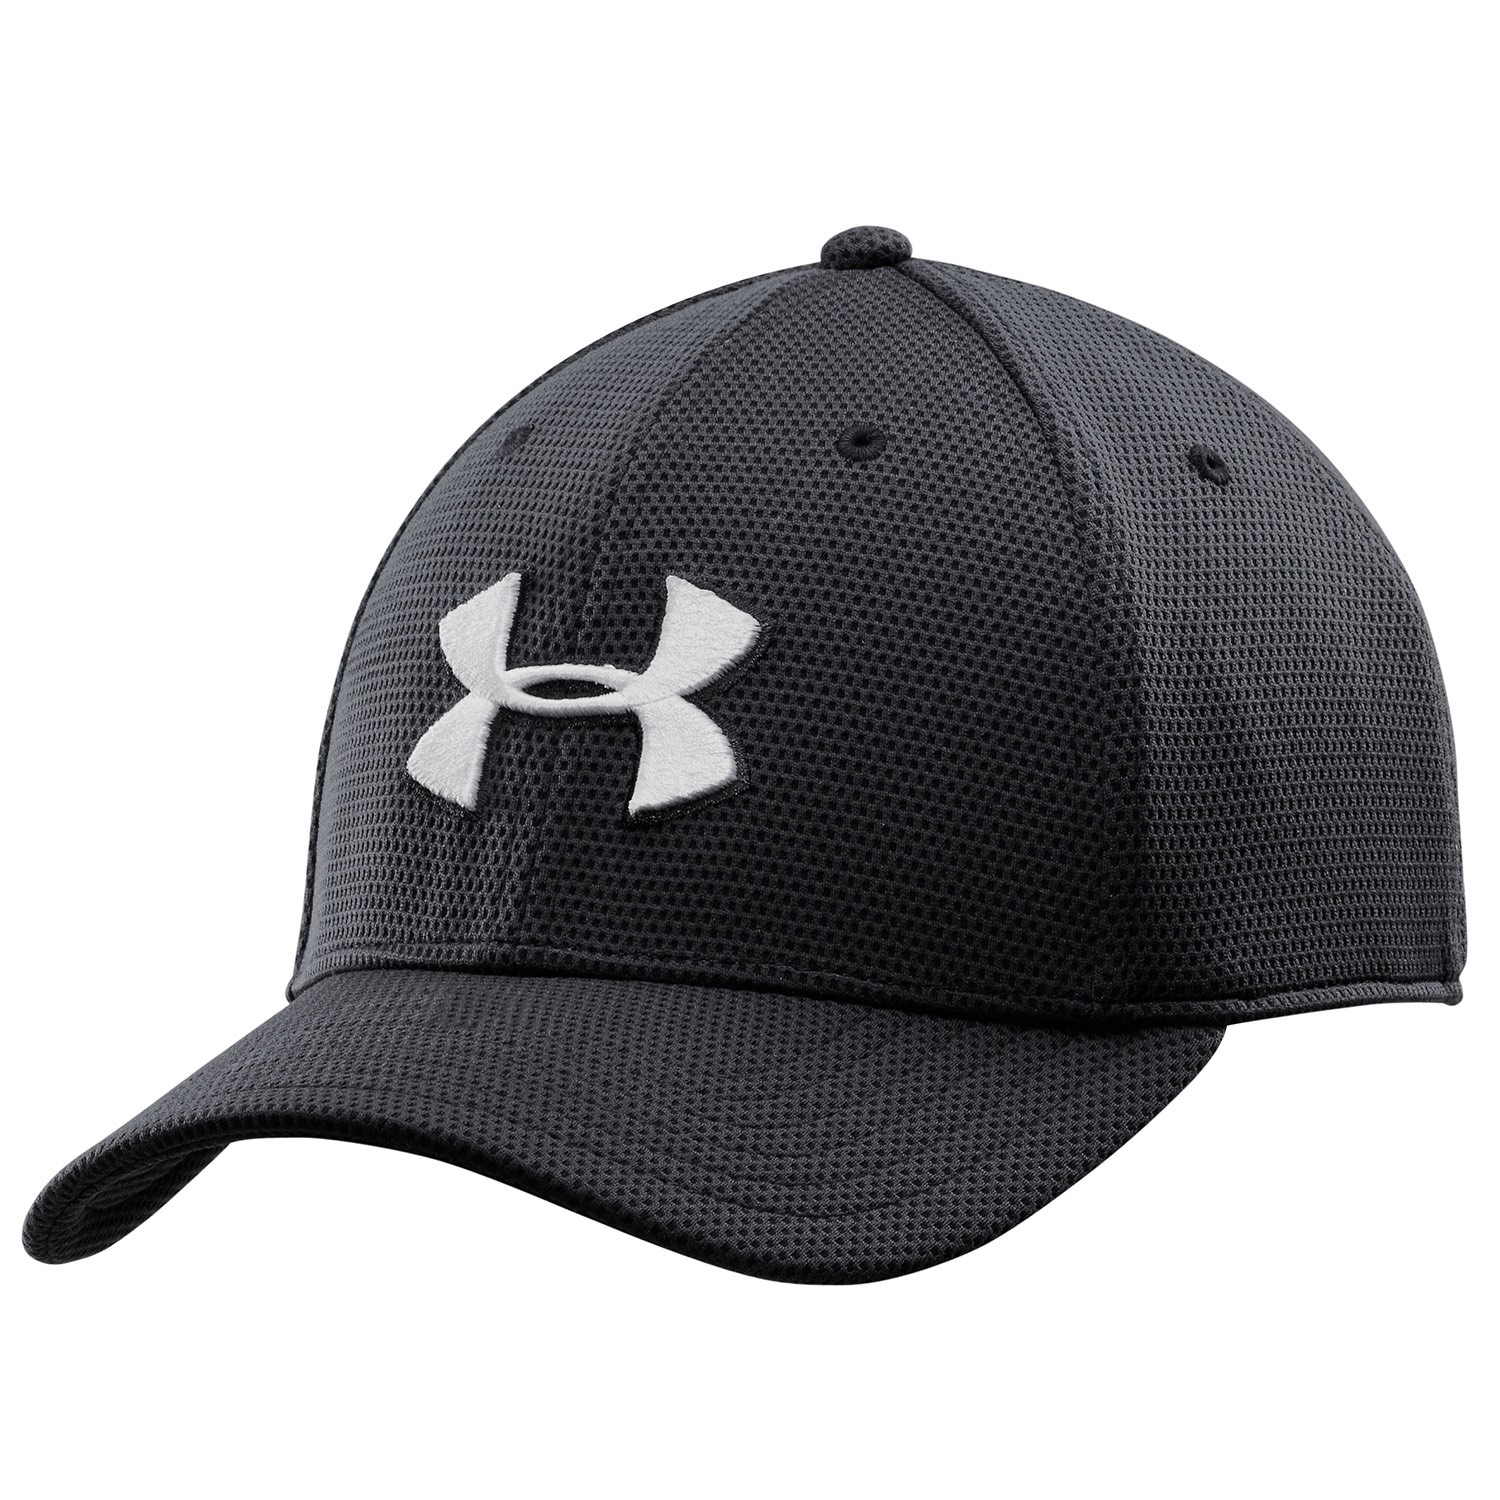 Under Armour Blitzing ll 18